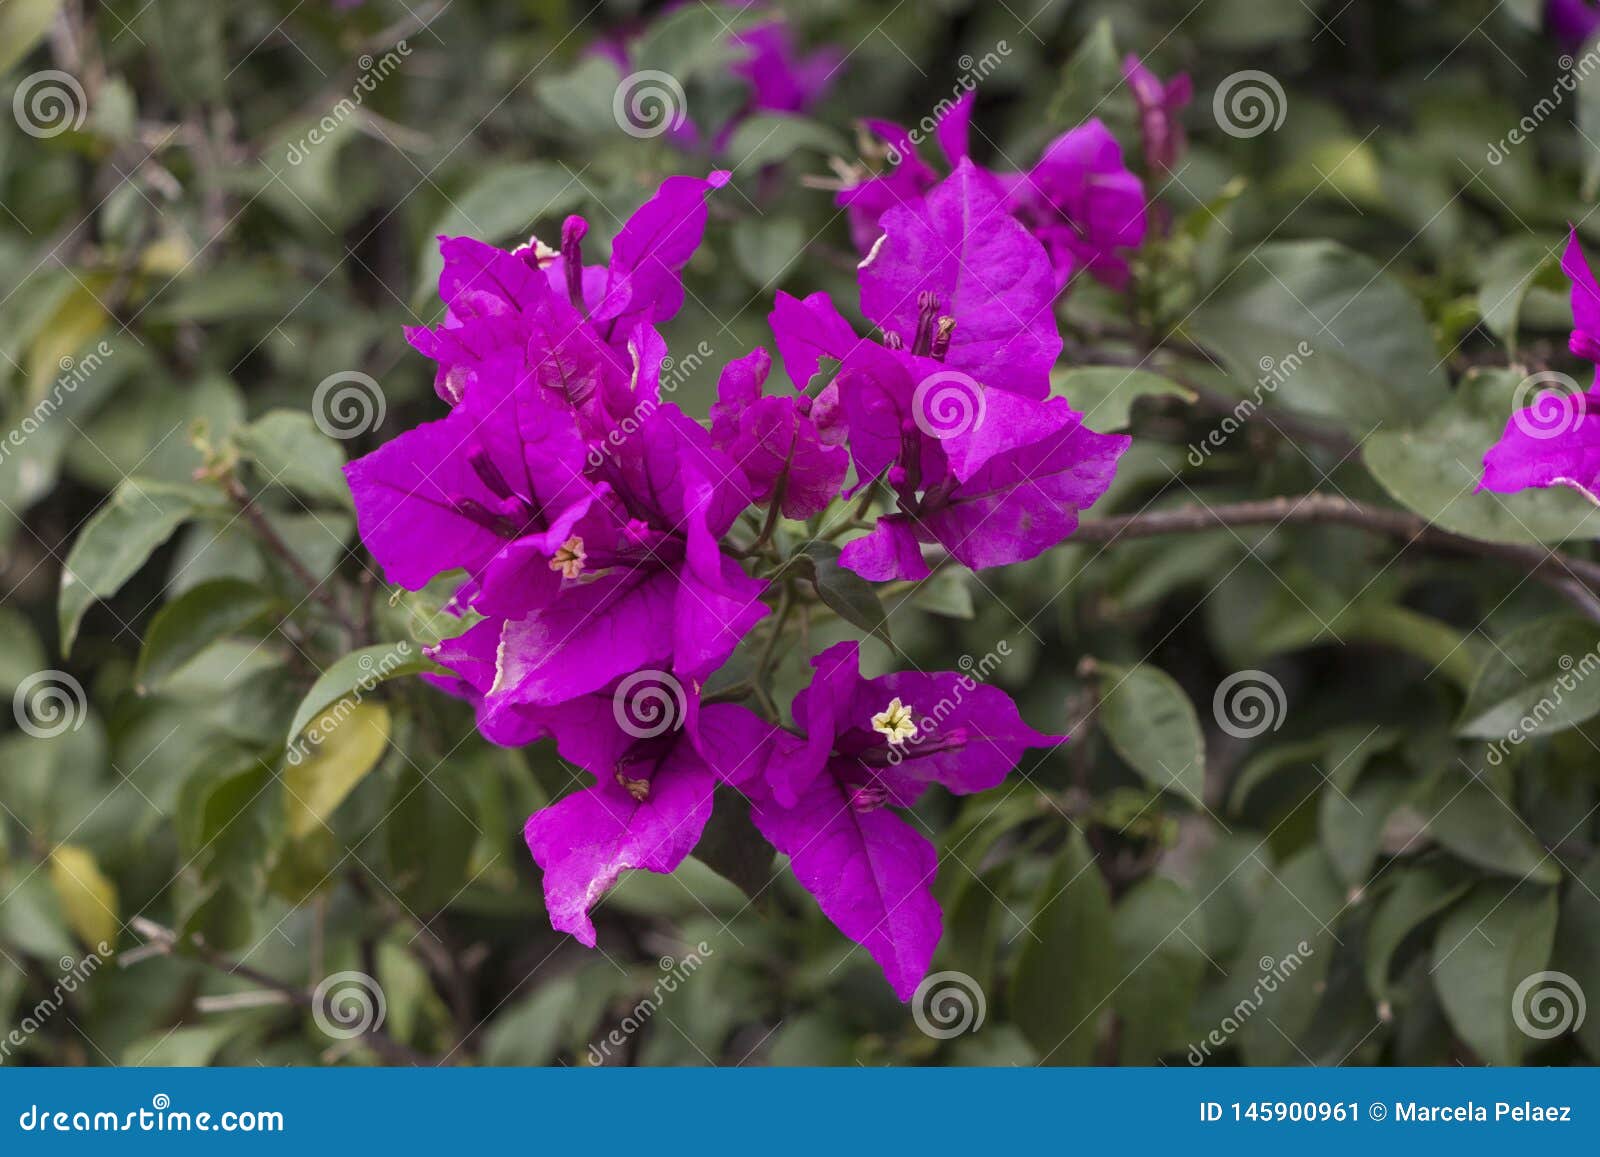 curazao or bougainvillea flowers with purple flowers with fresh green leaves in summer light with space for text